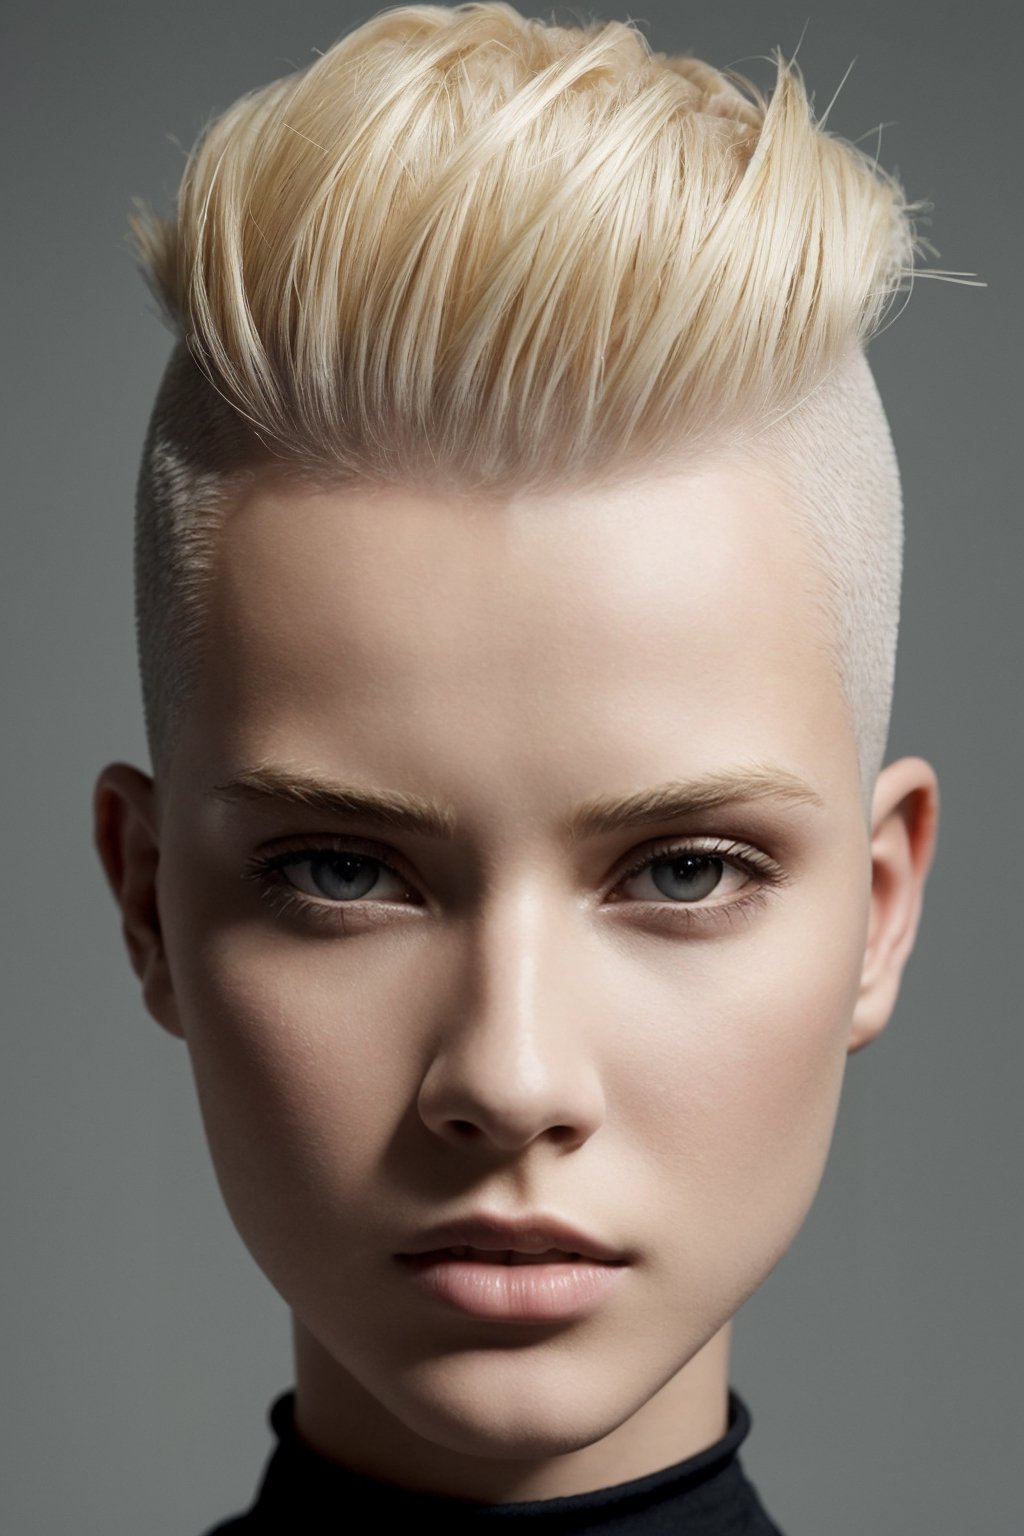 a 20 yo woman, blonde, (hi-top fade:1.3), dark theme, soothing tones, muted colors, high contrast, (natural skin texture, hyperrealism, soft light, sharp),sks woman